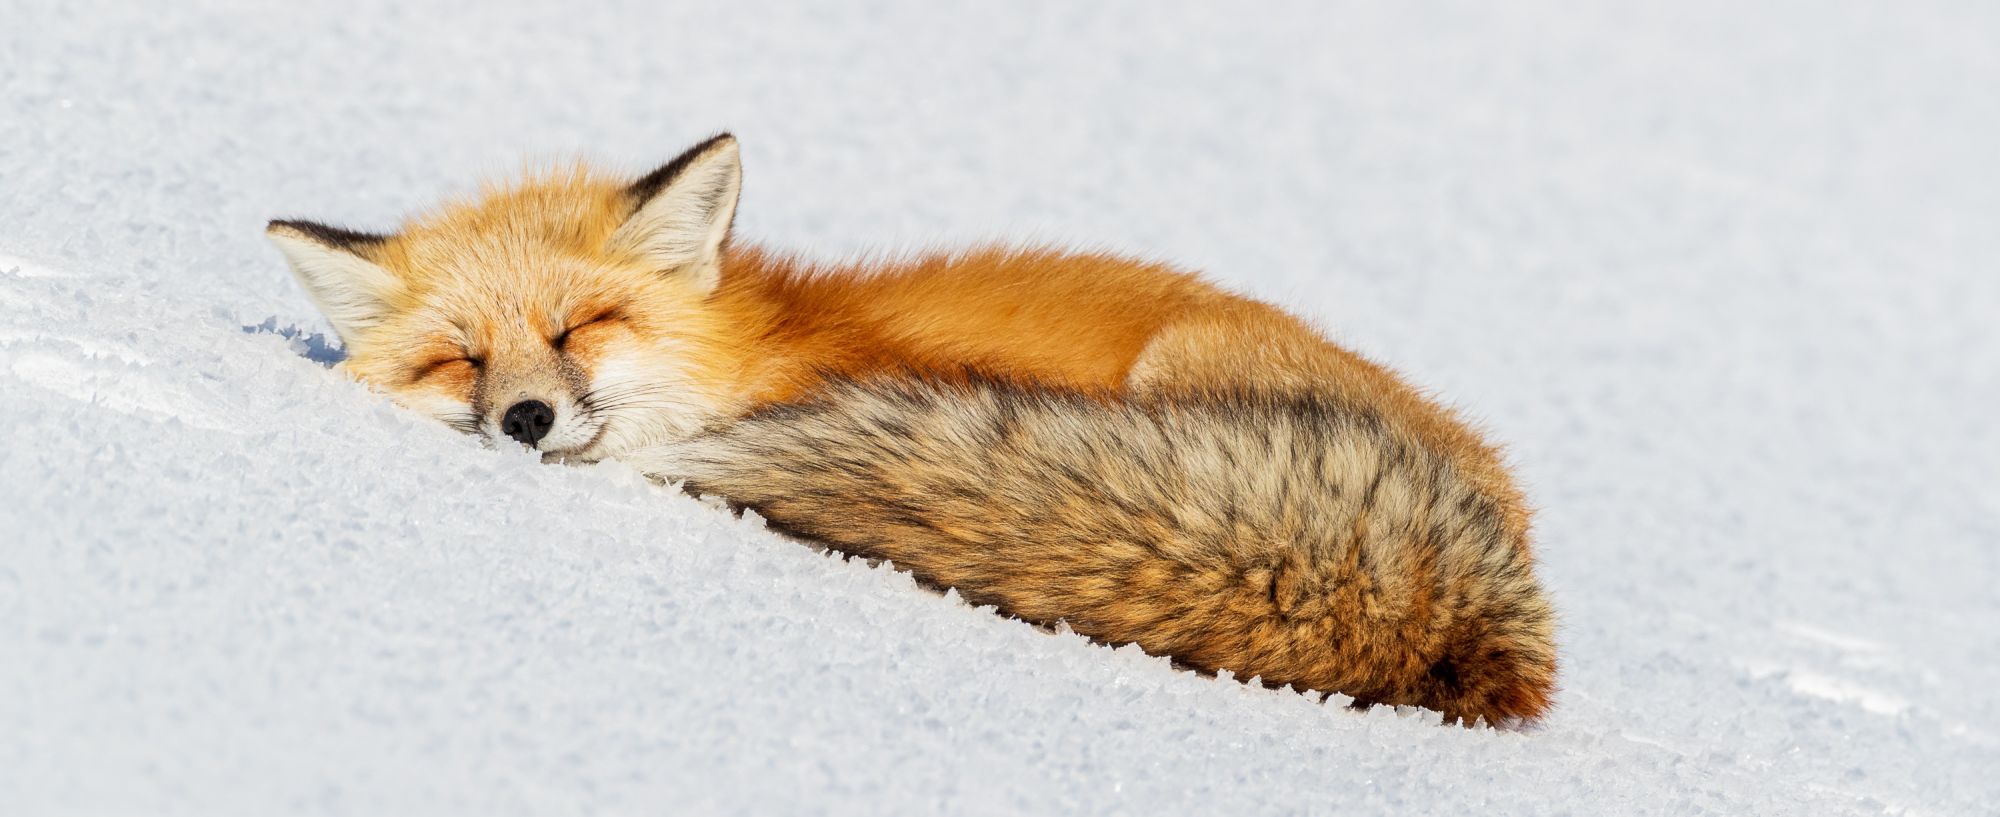 A fox is enjoying the winter sunshine during an afternoon nap in Yellowstone National Park. Image by Cindy Godell